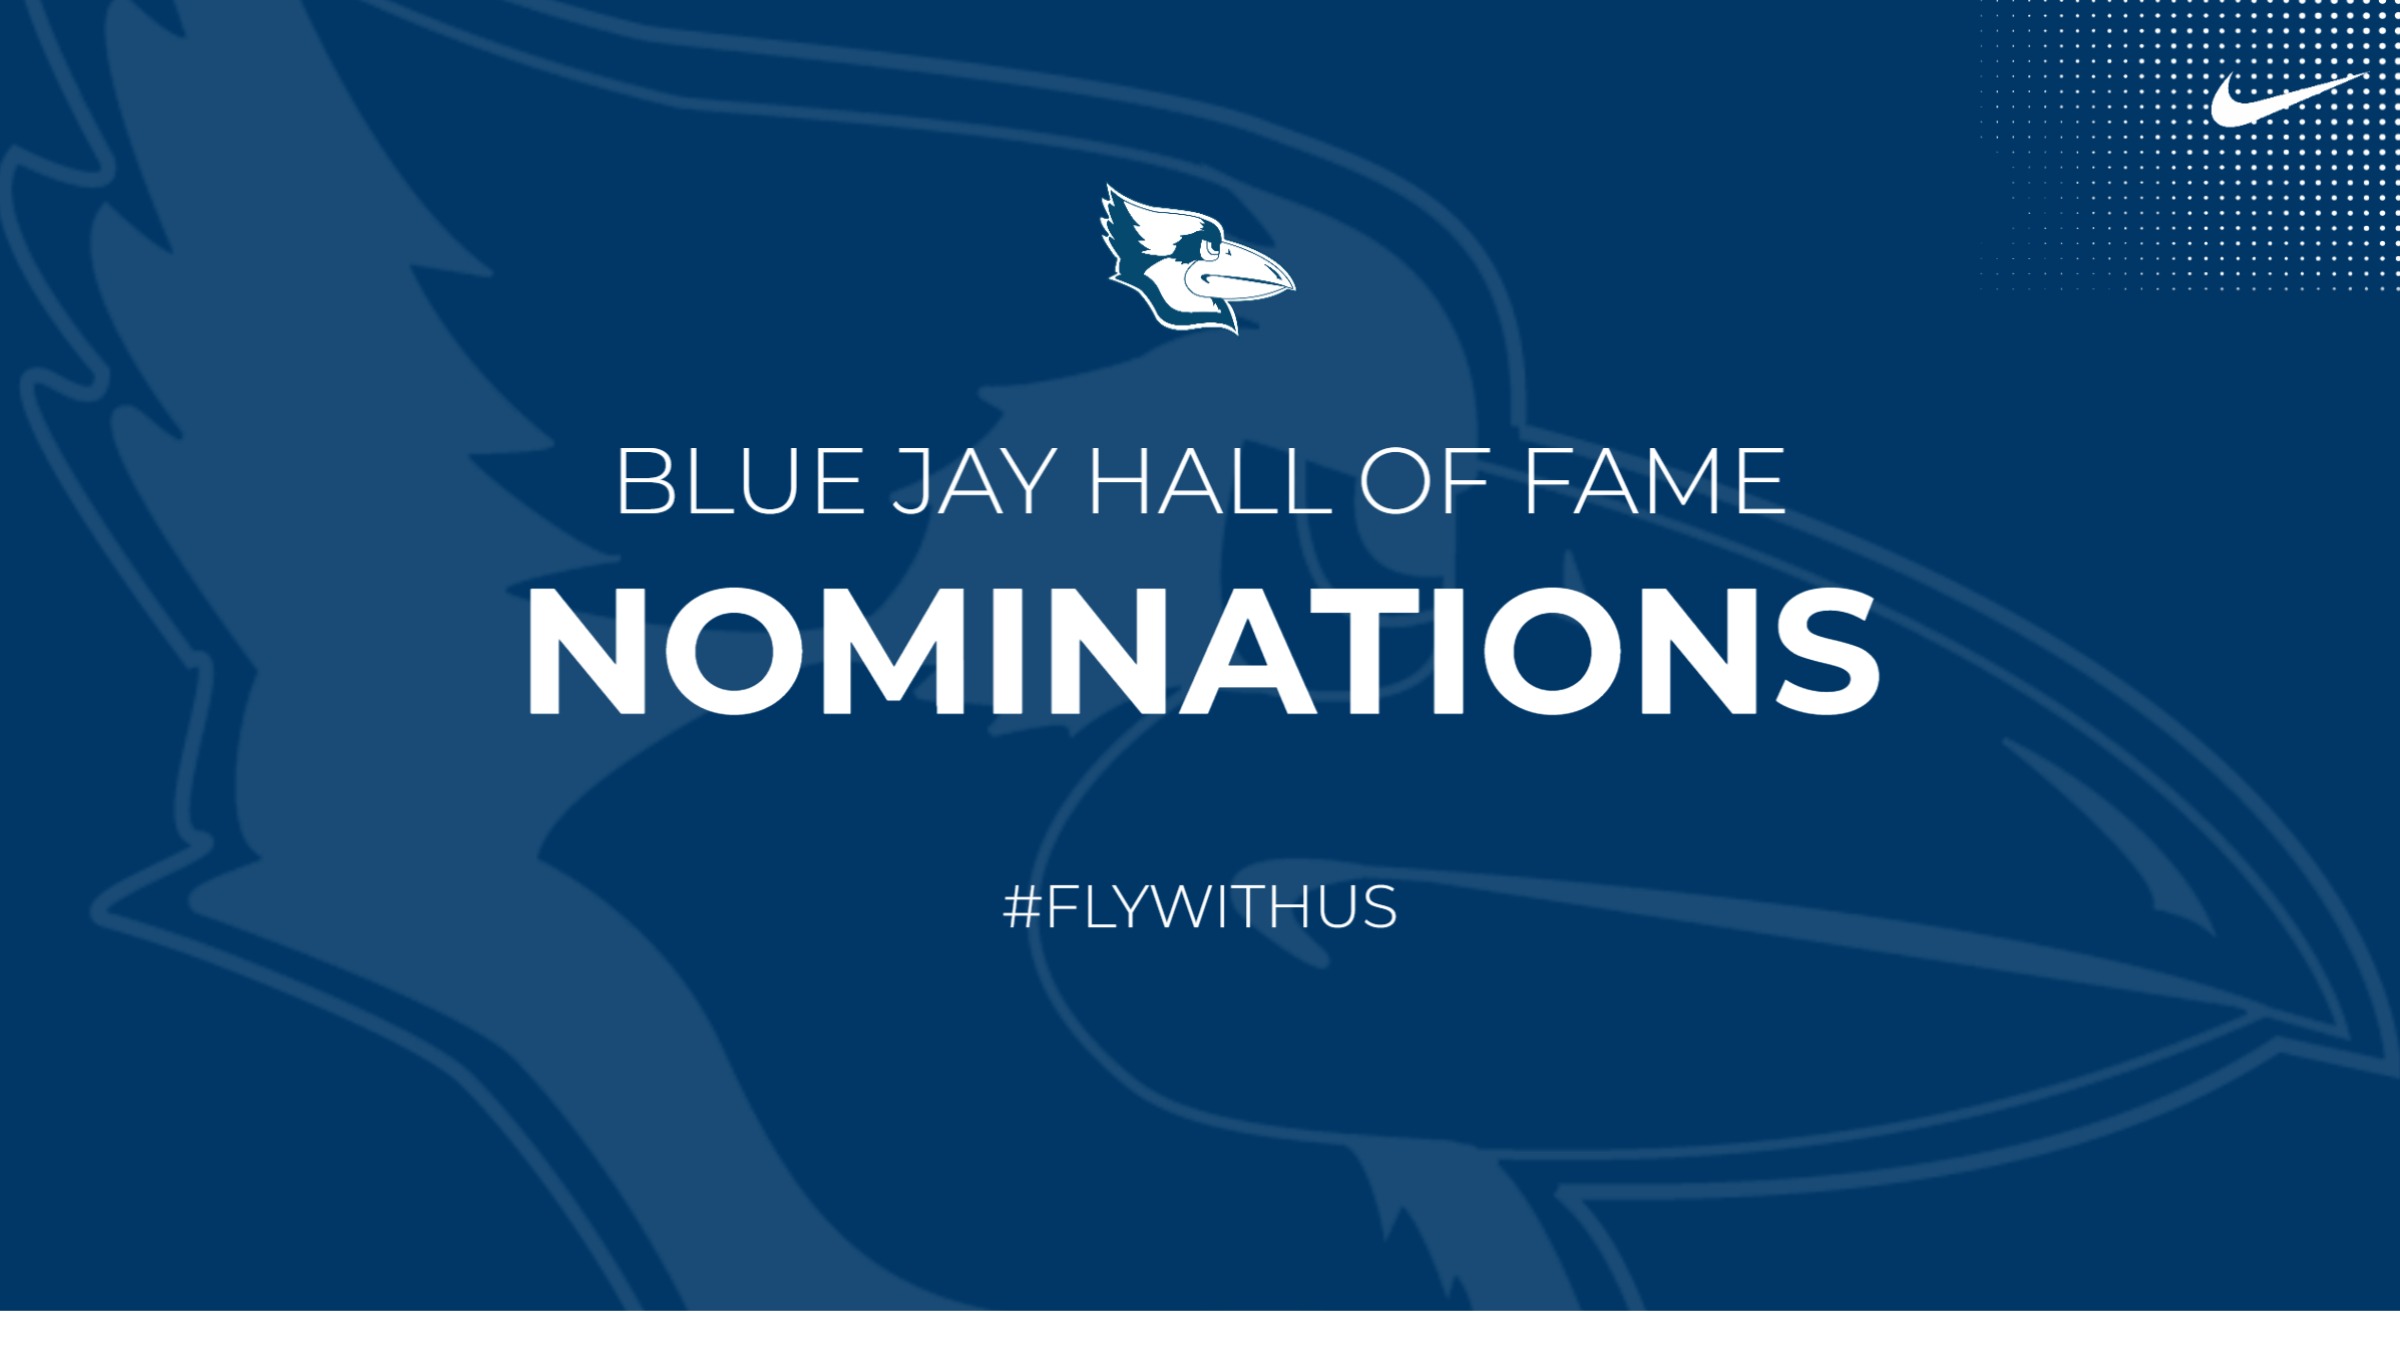 Accepting Nominations For The Athletic Hall of Fame